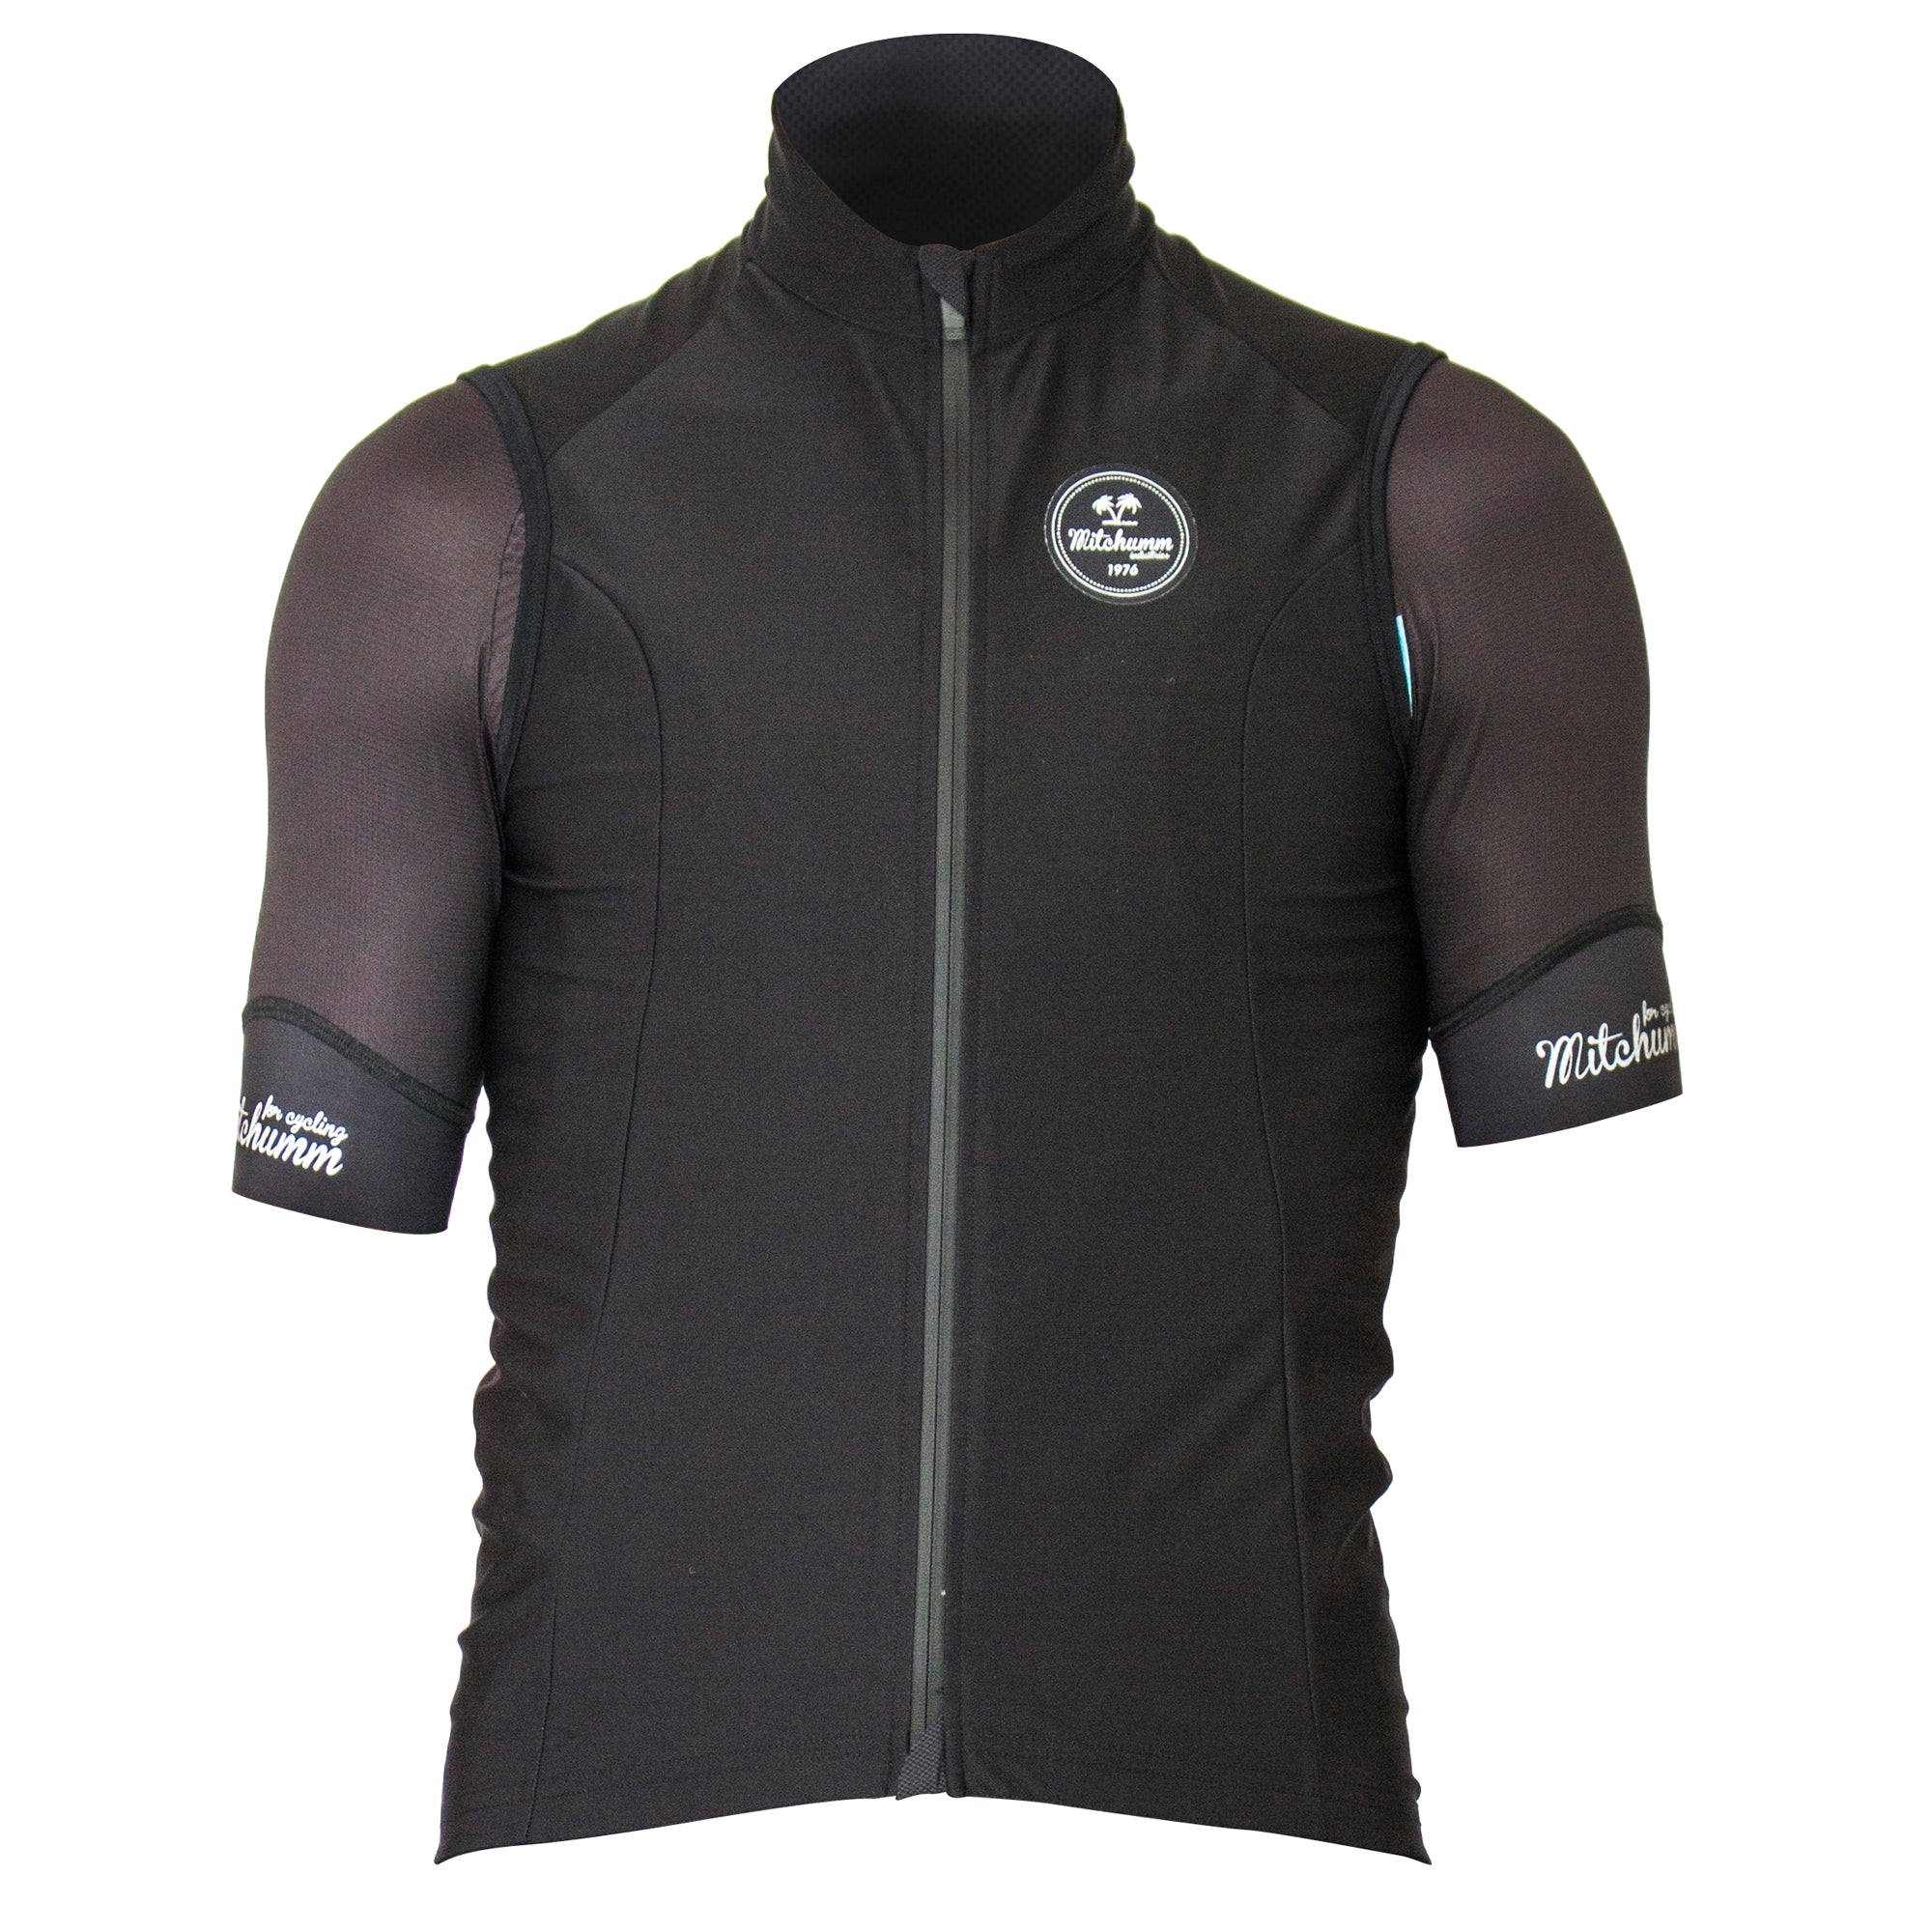 Mitchumm Cycling - Wind proof gilet